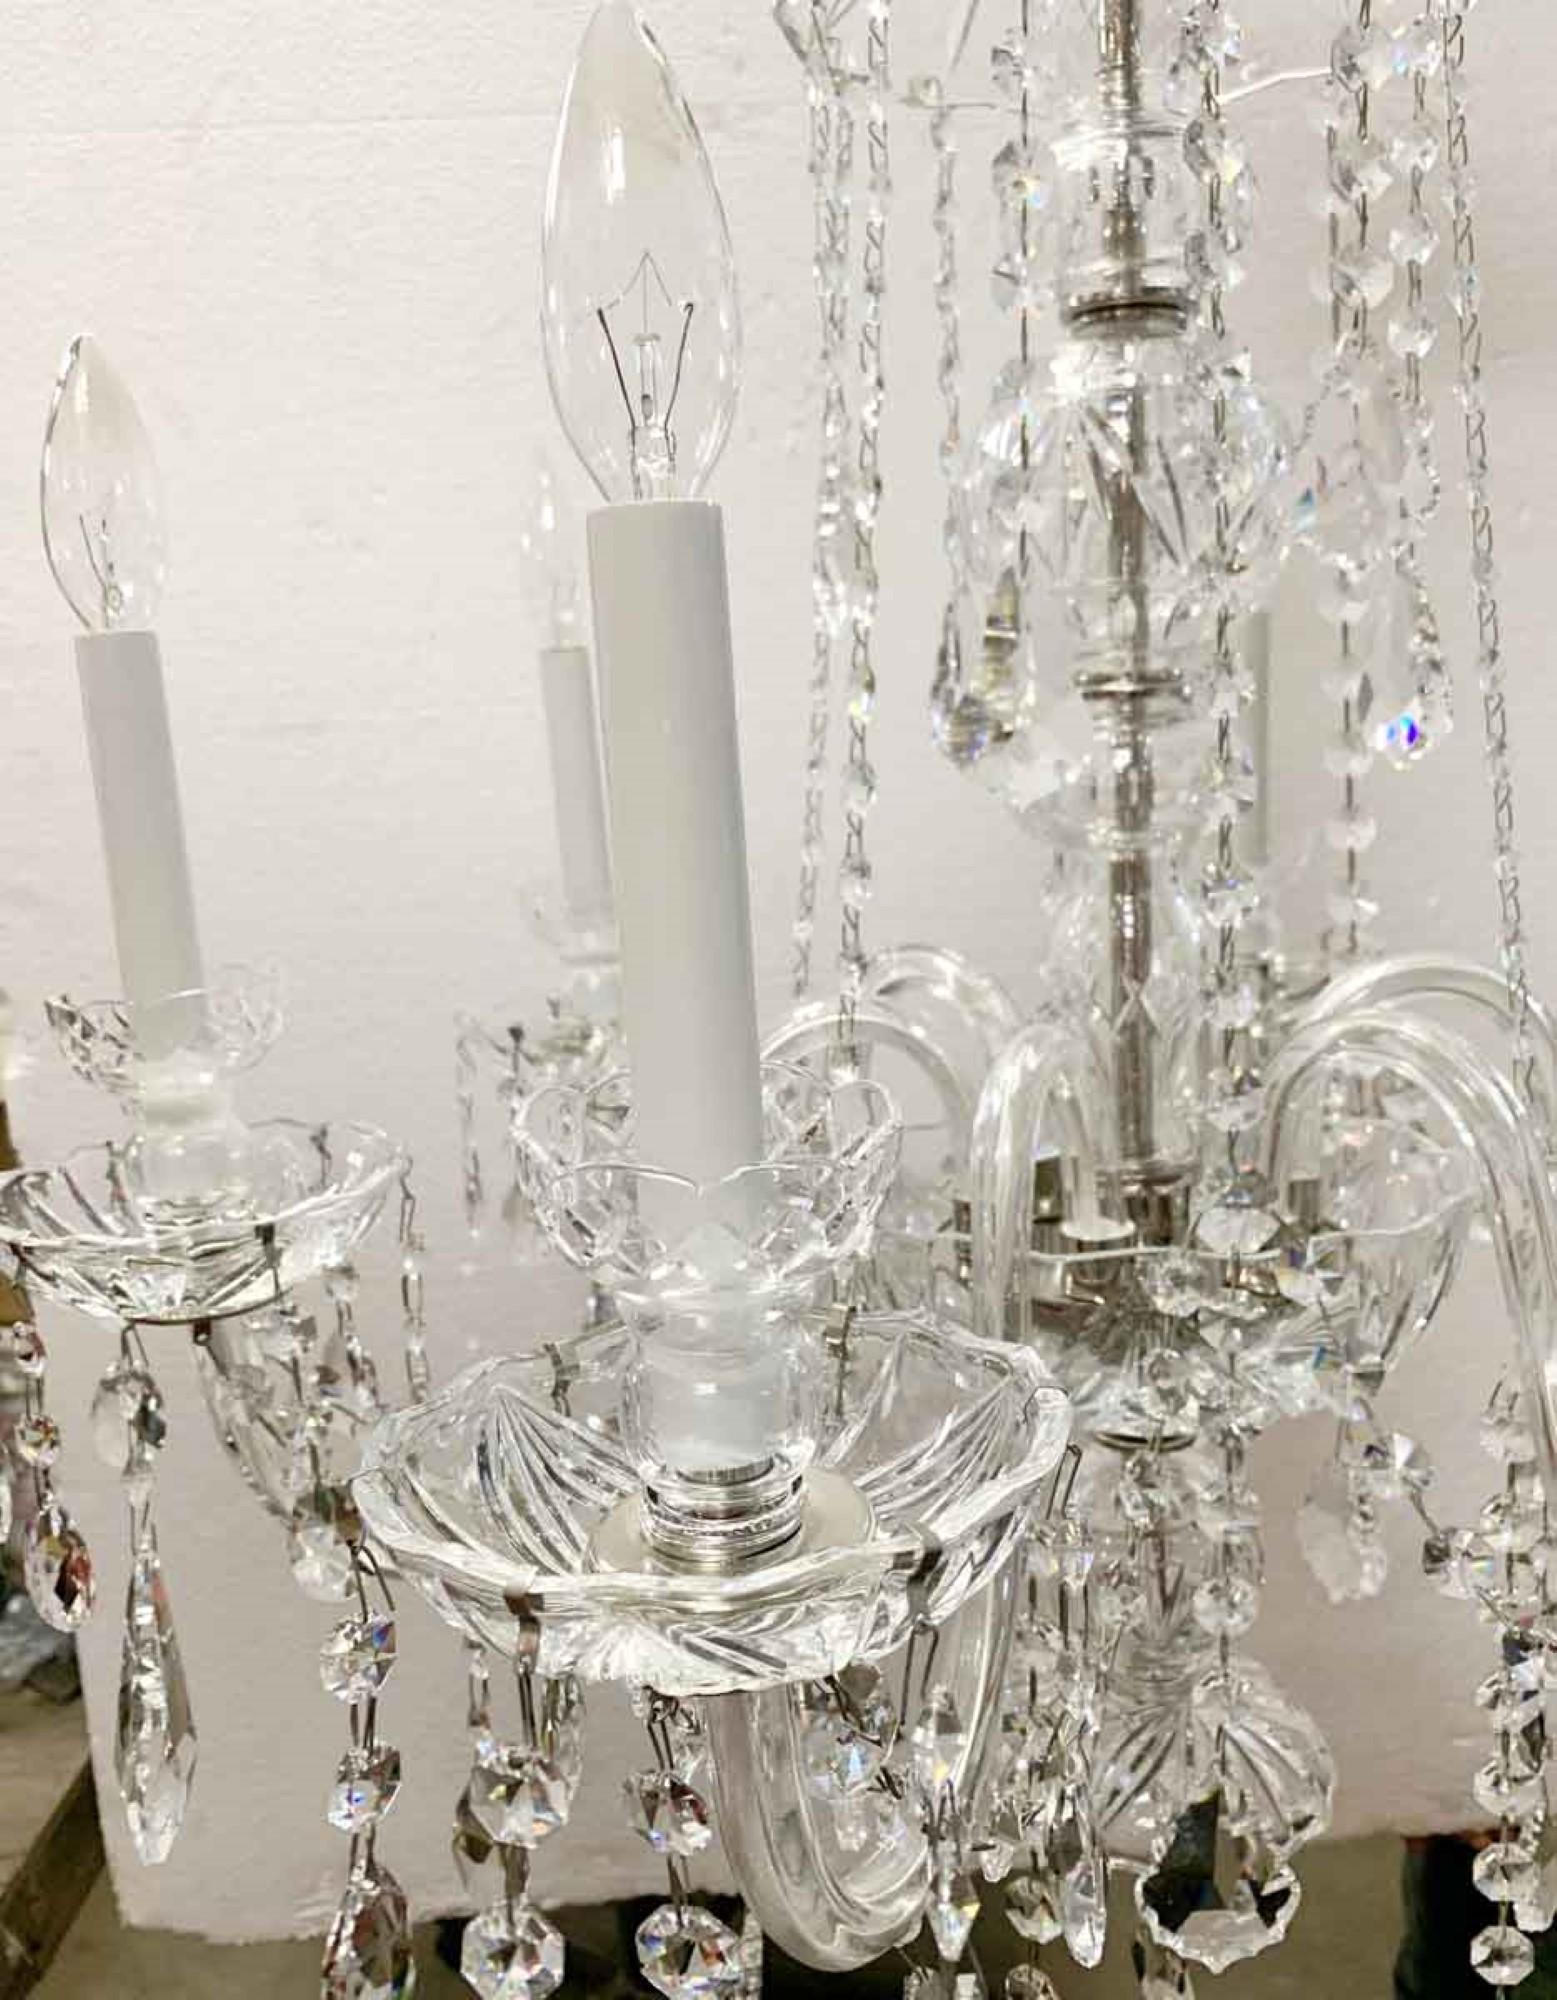 Late 20th Century 1980s NYC Waldorf Astoria Hotel Crystal Chandelier with 6 Glass Arms